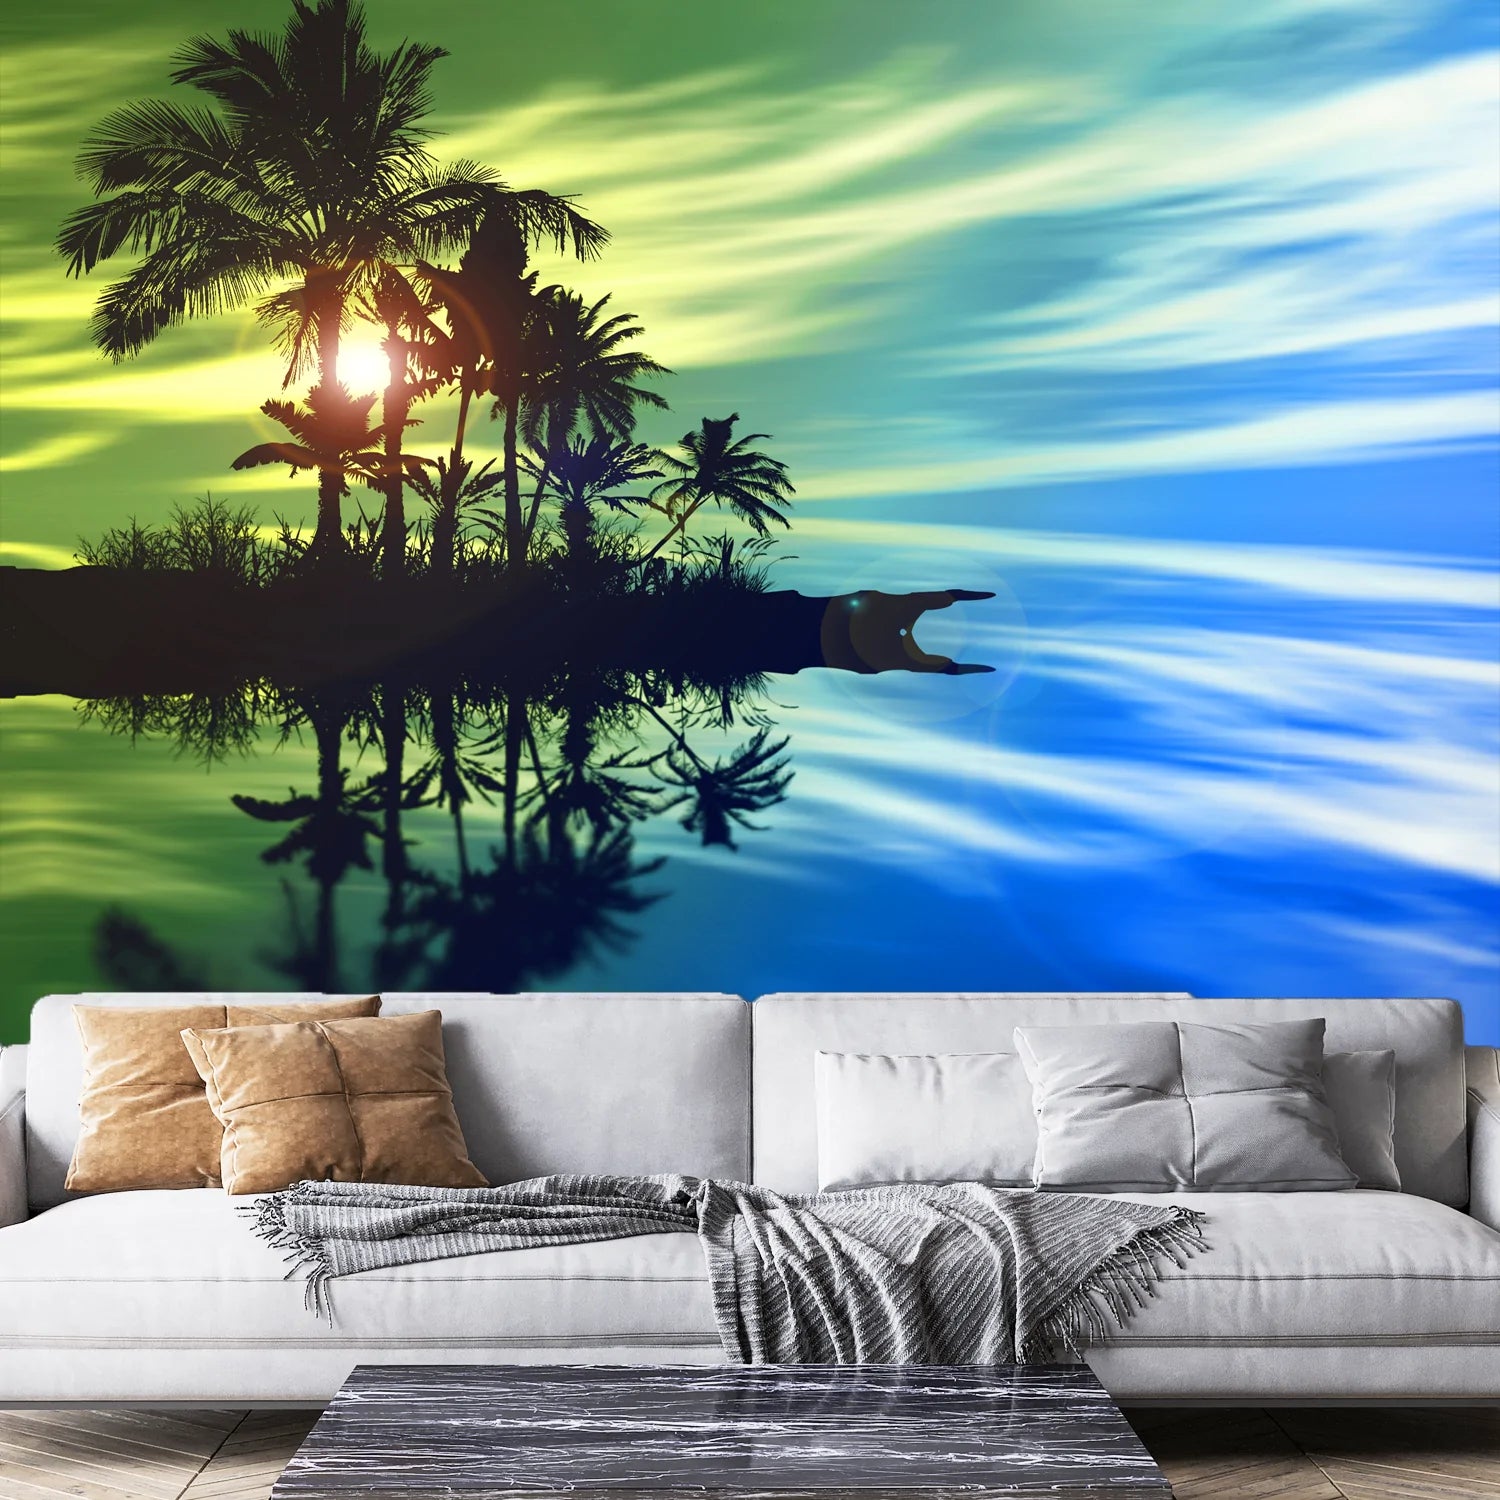 Beautifull wallpaper of beach & Sky with tree for Wall decoration